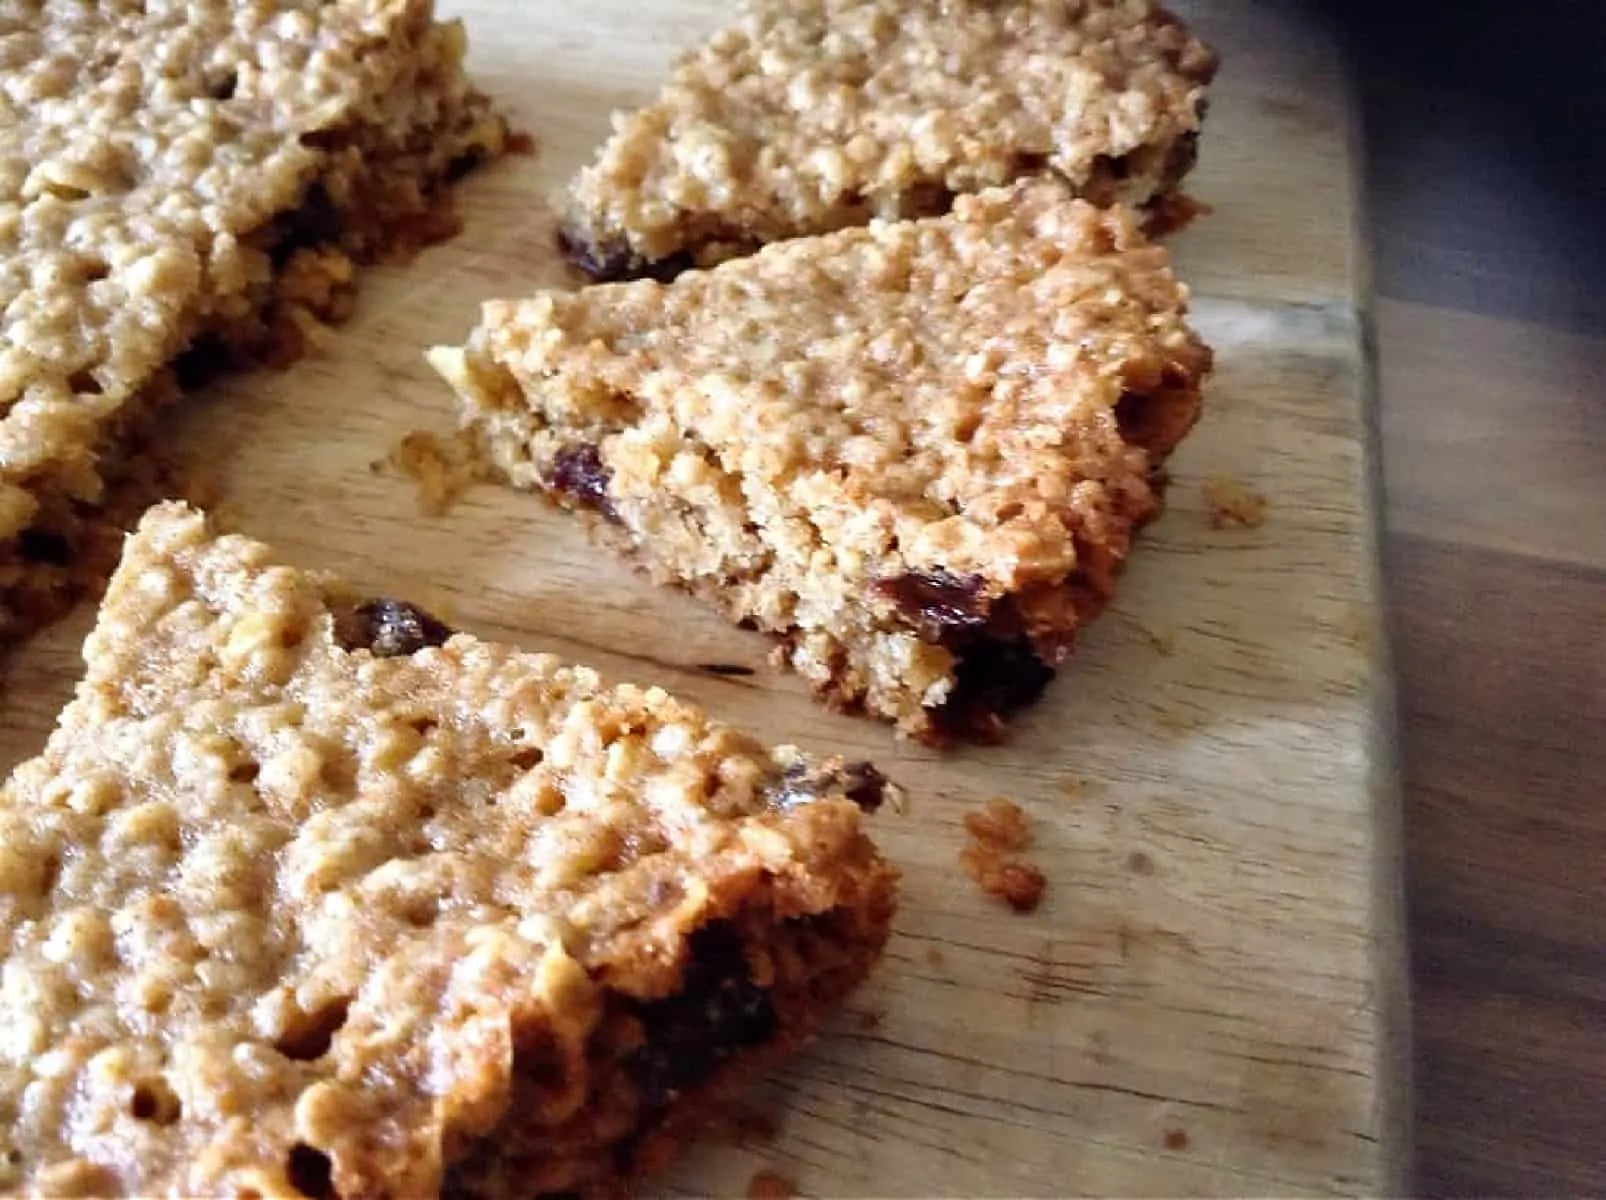 Close up of slices of oat bars on a wooden chopping board.